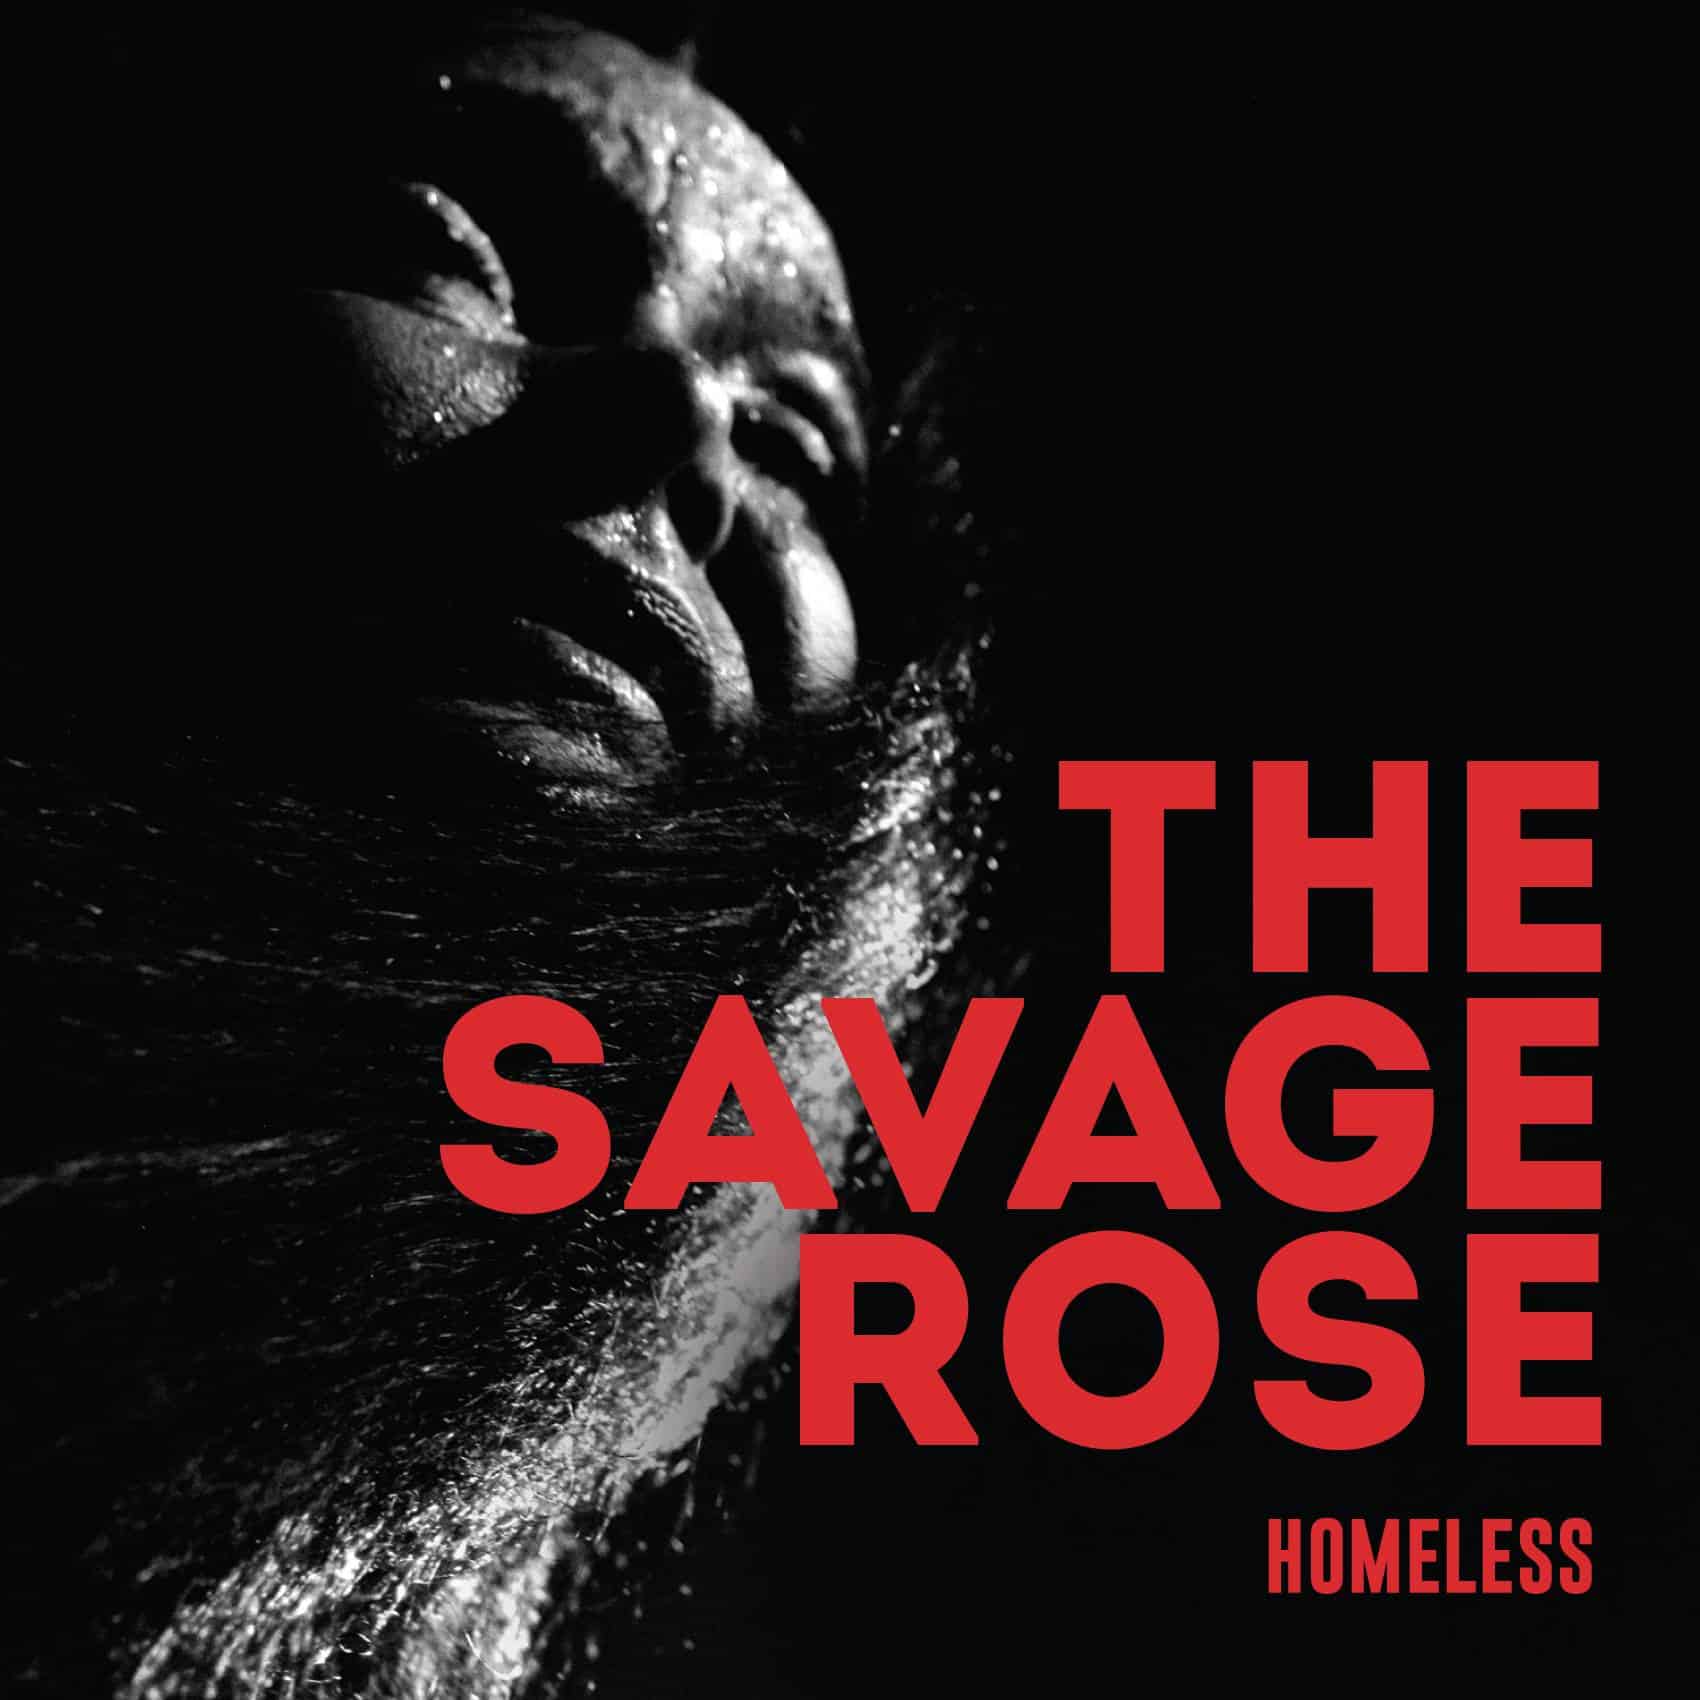 The Savage Rose : “Homeless" CD & LP 25th of January 2019 Target Music.